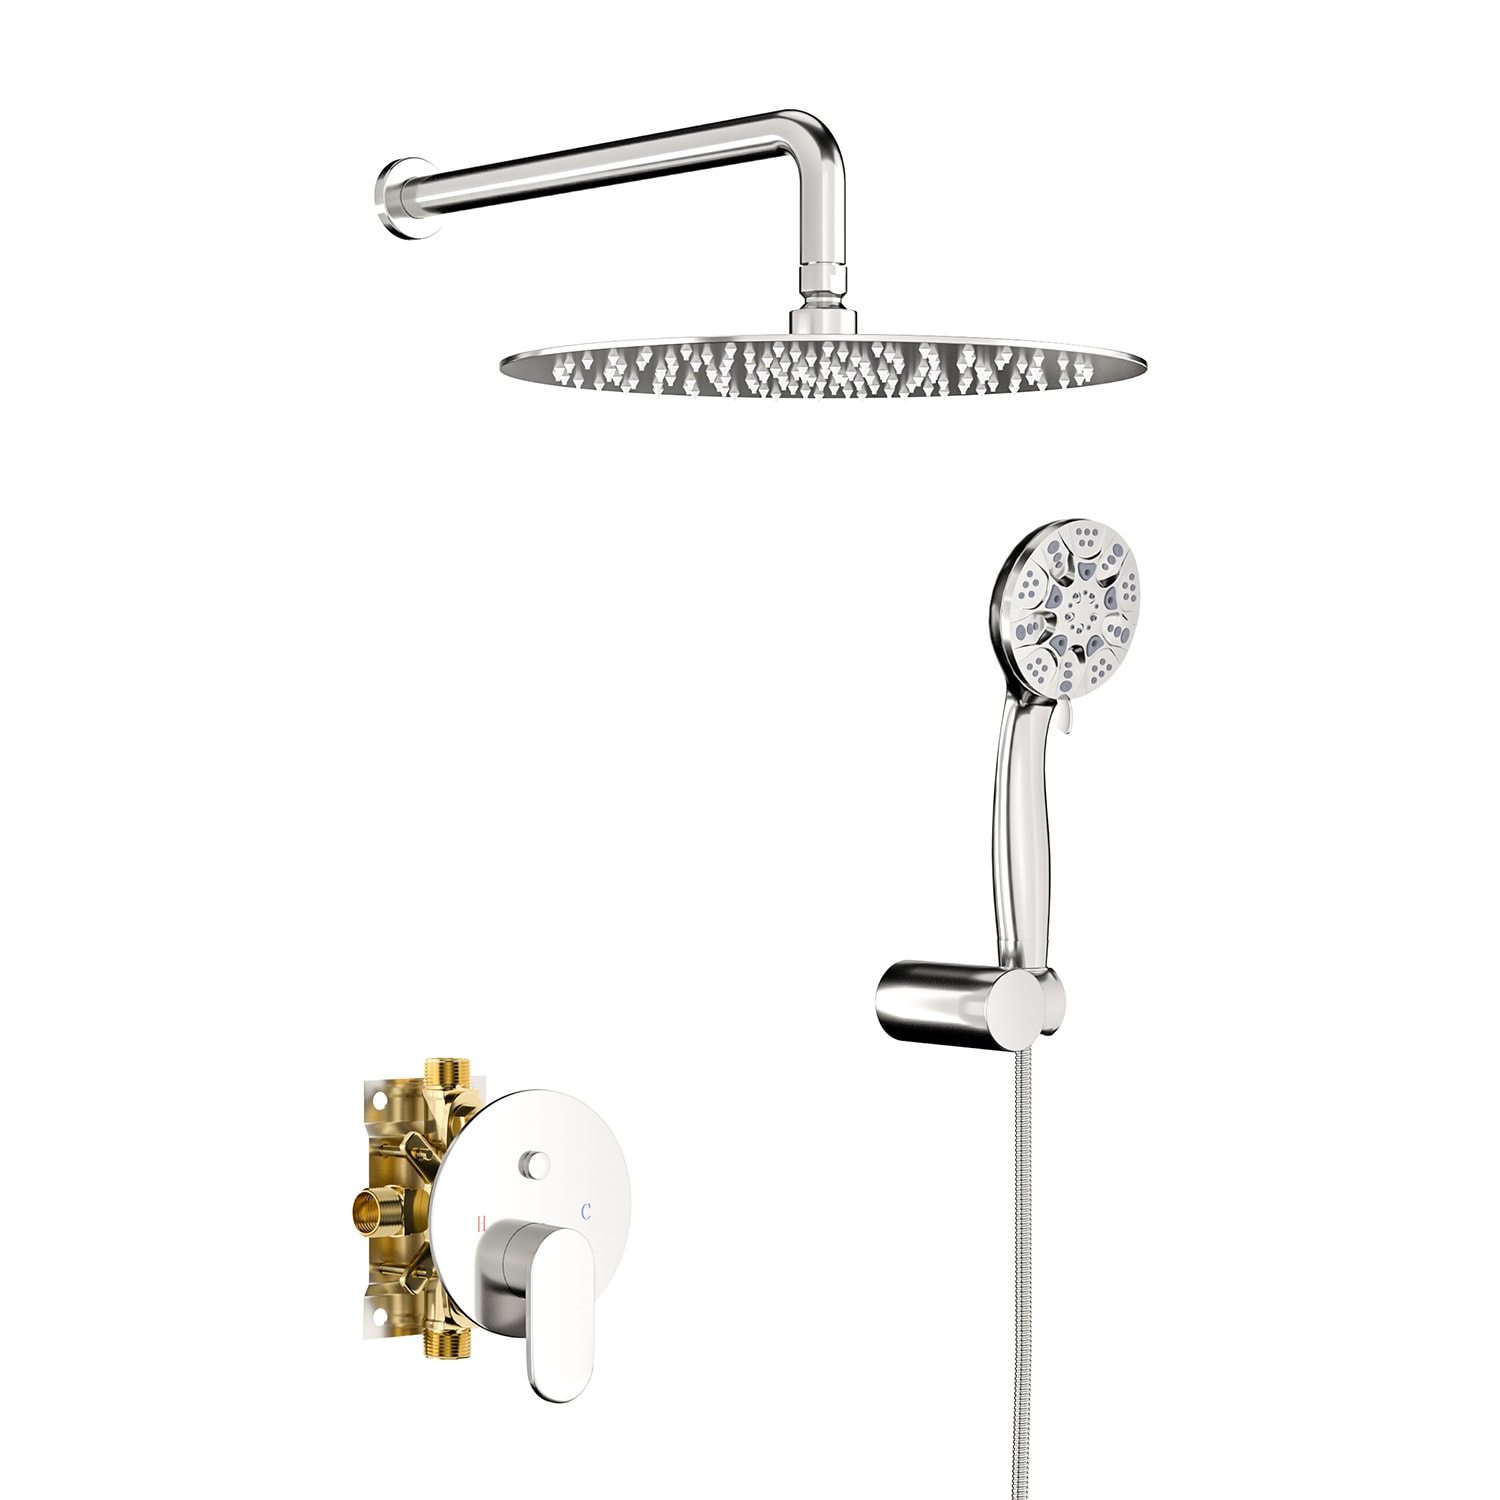 GZMR Shower System Brushed Nickel Dual Head Waterfall Built-In Shower Faucet System with 2-way Diverter Valve Included Stainless Steel -  MR-EB-C-2-12-BN